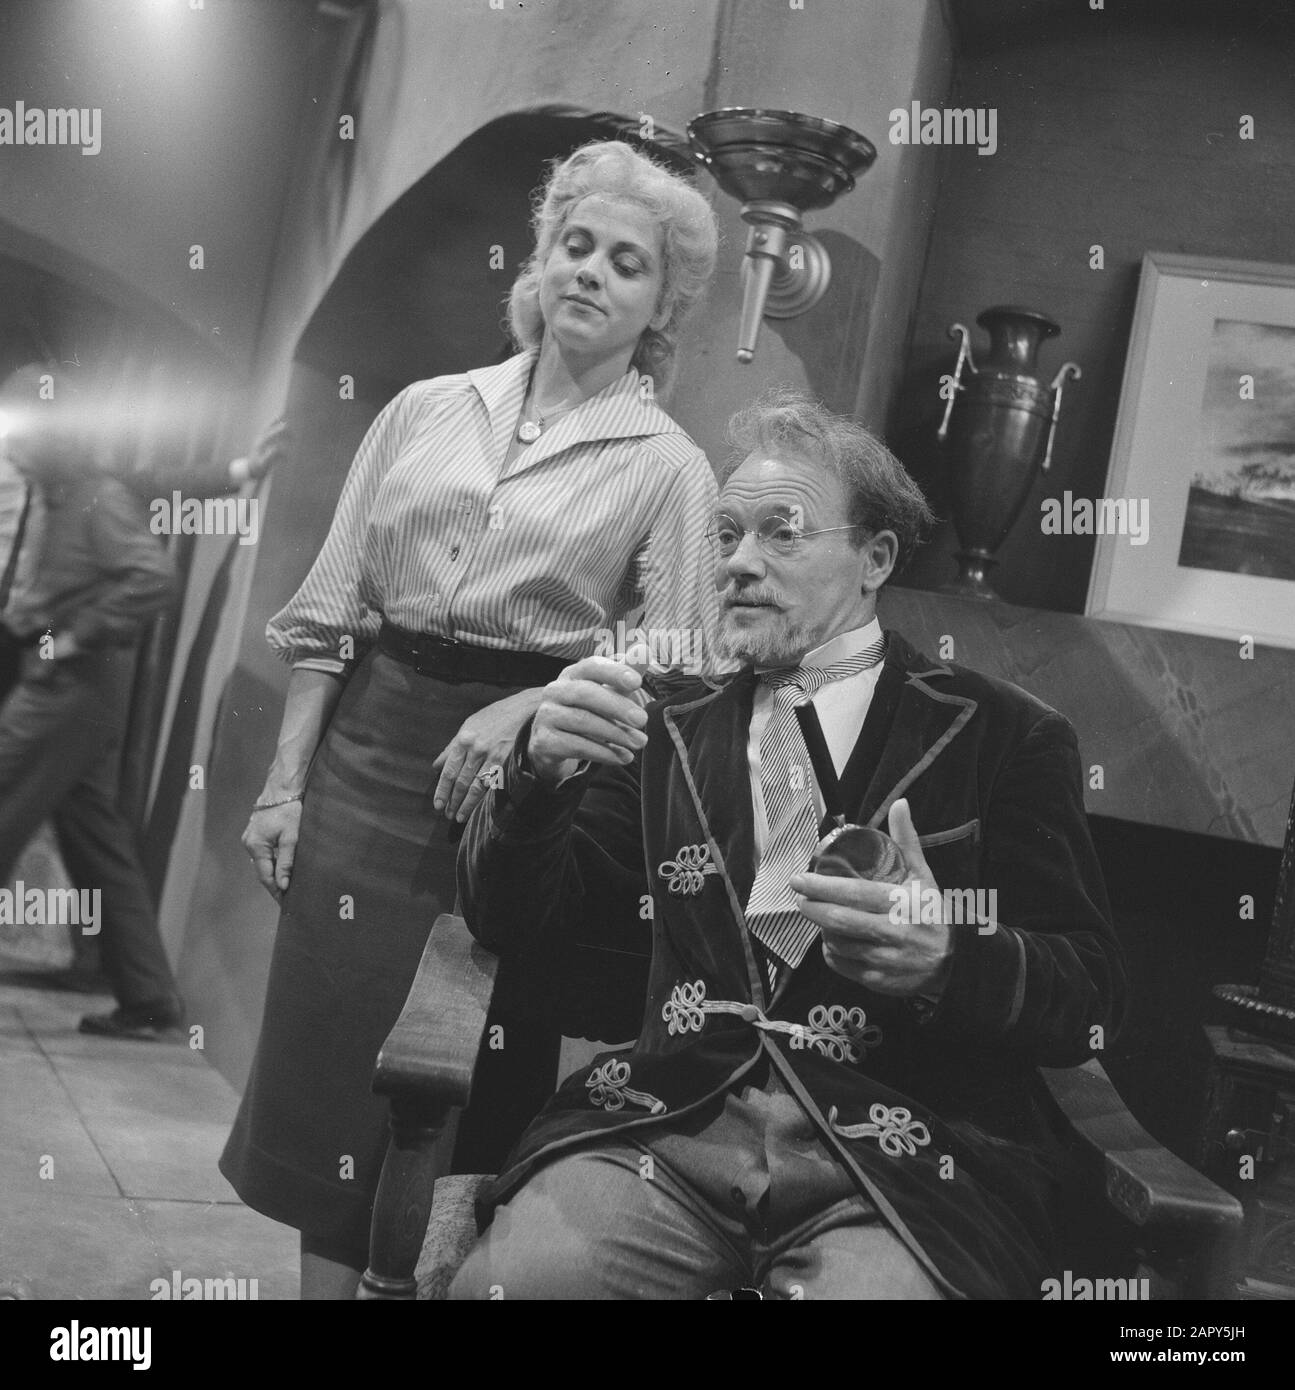 'He sits at the crucible”, a TV game by VPRO, Max Croiset as professor Mensch and Emmy Lopes Dias as as Miss Schmidt Annotation: Towards a play by Kaj Munk Date: 17 October 1962 Keywords: actors, television dramas Personal name: Croiset, Max, Lopes Dias, Emmy Institution name: VPRO Stock Photo